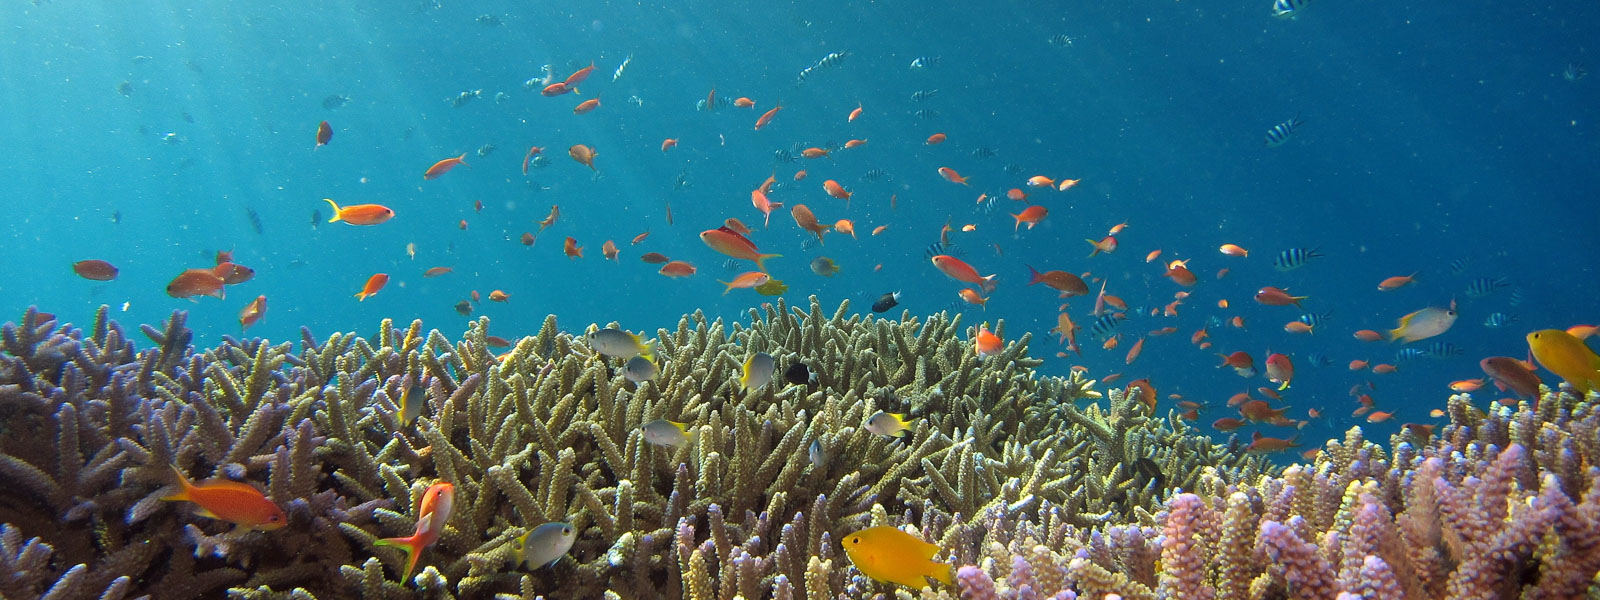 The decline of tropical reefs should alarm us. But there is reason to hope